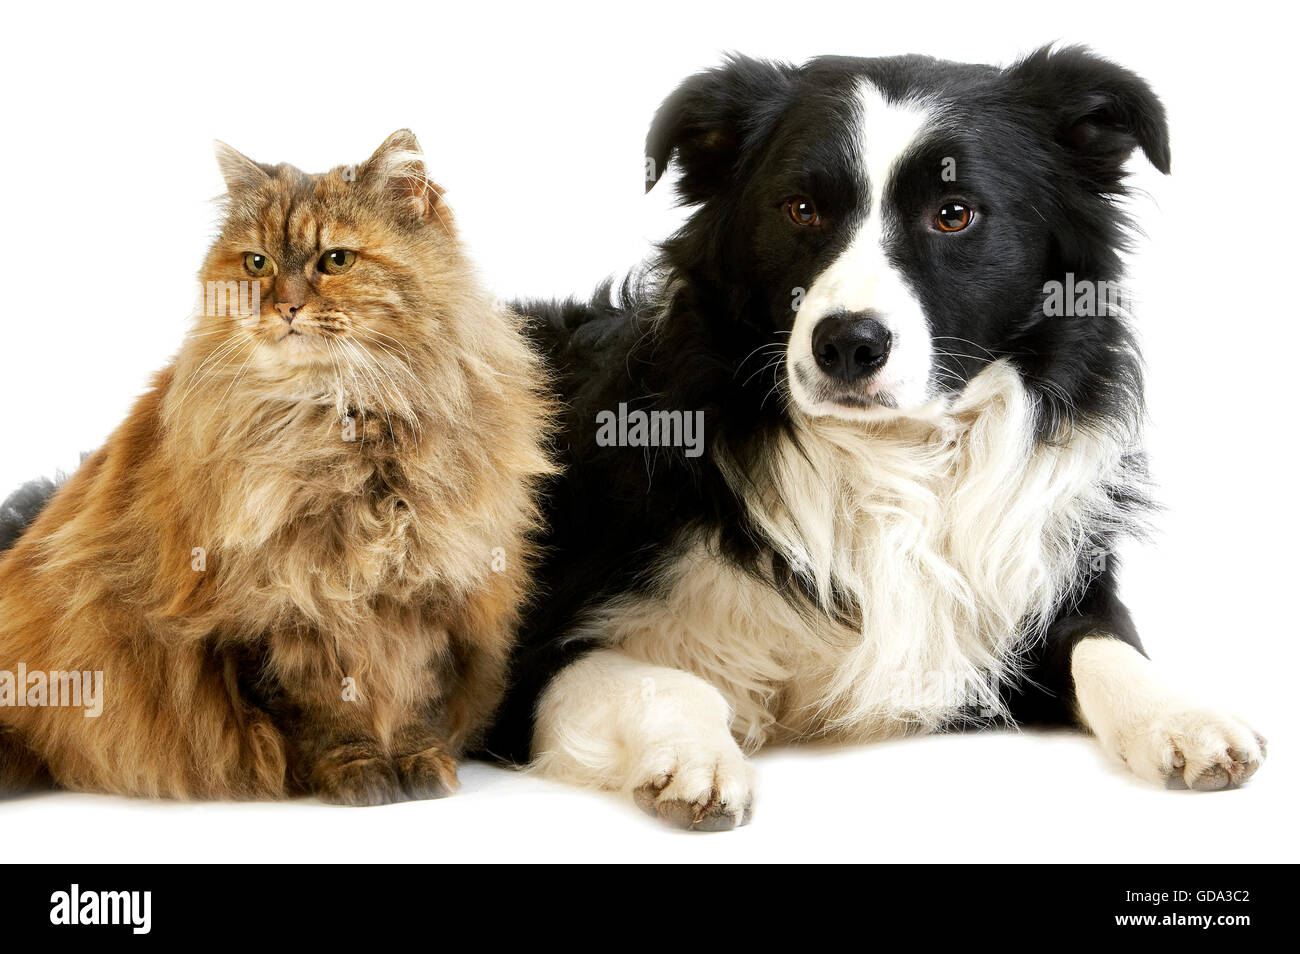 Border Collie Male with Tortoiseshell Persian Female, Dog and Cat Stock Photo